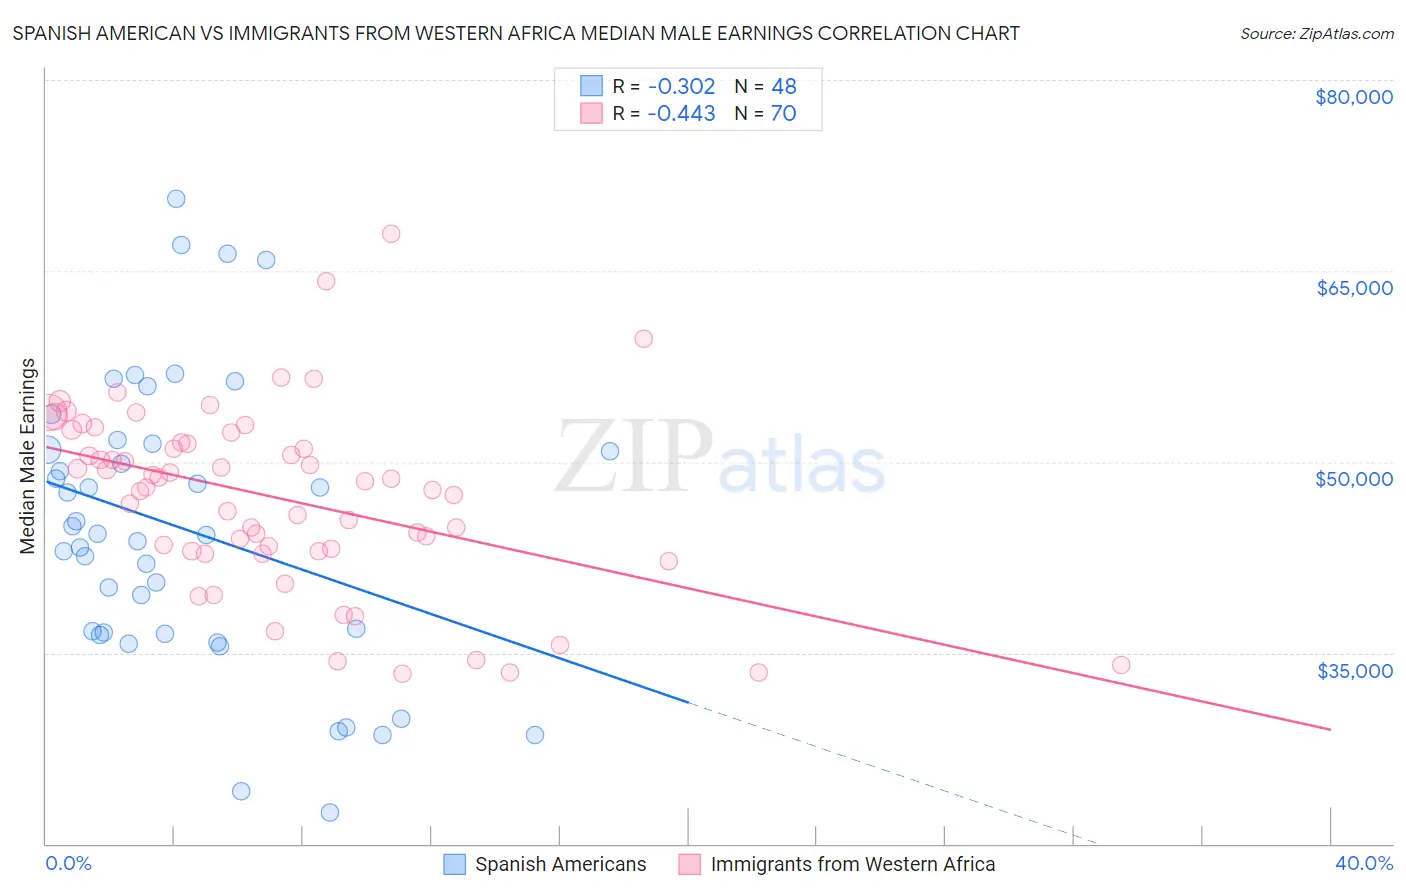 Spanish American vs Immigrants from Western Africa Median Male Earnings